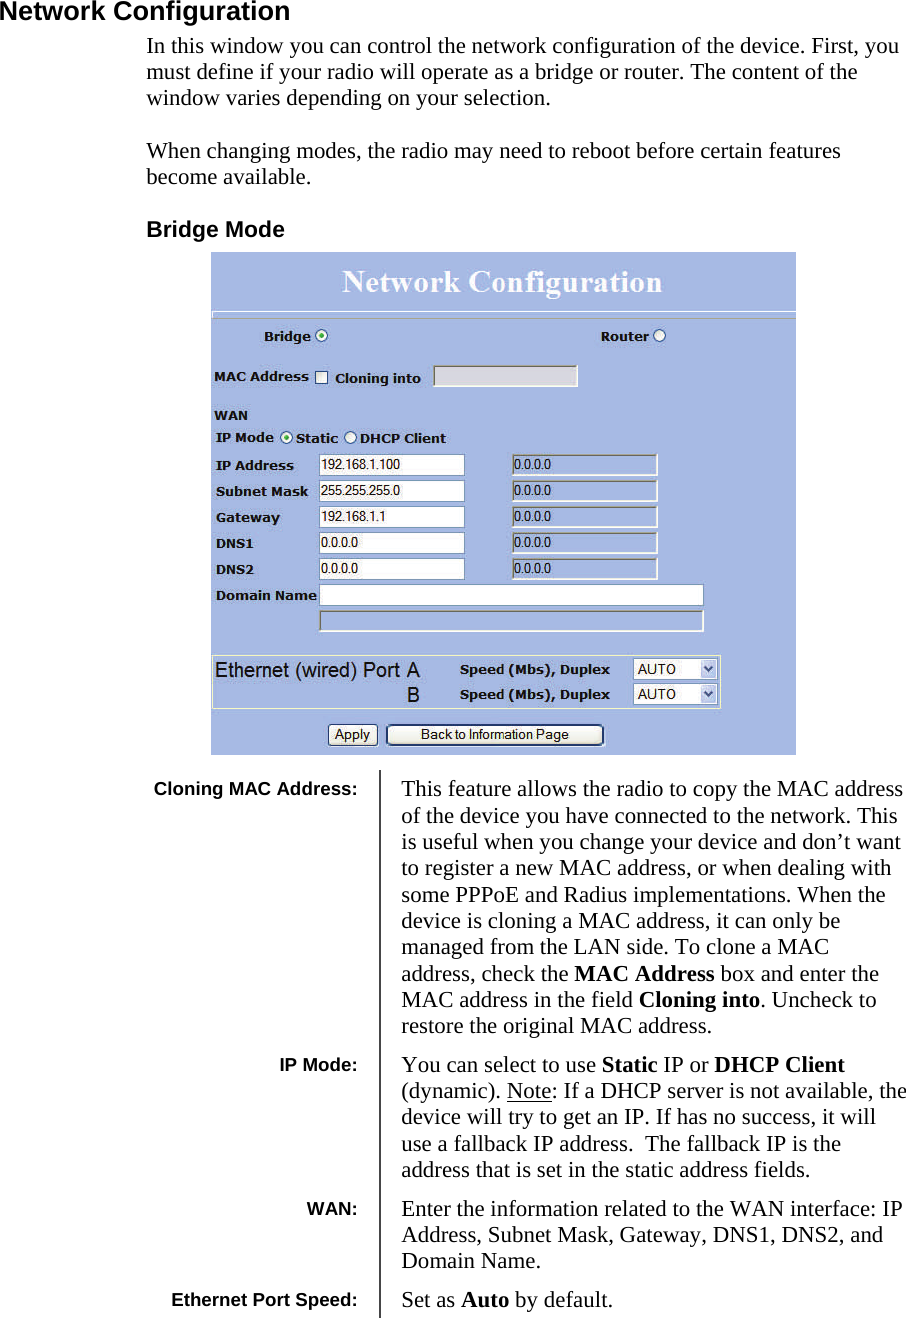  181818 Network Configuration In this window you can control the network configuration of the device. First, you must define if your radio will operate as a bridge or router. The content of the window varies depending on your selection.   When changing modes, the radio may need to reboot before certain features become available. Bridge Mode                    Cloning MAC Address:  This feature allows the radio to copy the MAC address of the device you have connected to the network. This is useful when you change your device and don’t want to register a new MAC address, or when dealing with some PPPoE and Radius implementations. When the device is cloning a MAC address, it can only be managed from the LAN side. To clone a MAC address, check the MAC Address box and enter the MAC address in the field Cloning into. Uncheck to restore the original MAC address. IP Mode:  You can select to use Static IP or DHCP Client (dynamic). Note: If a DHCP server is not available, the device will try to get an IP. If has no success, it will use a fallback IP address.  The fallback IP is the address that is set in the static address fields. WAN:  Enter the information related to the WAN interface: IP Address, Subnet Mask, Gateway, DNS1, DNS2, and Domain Name. Ethernet Port Speed:  Set as Auto by default. 